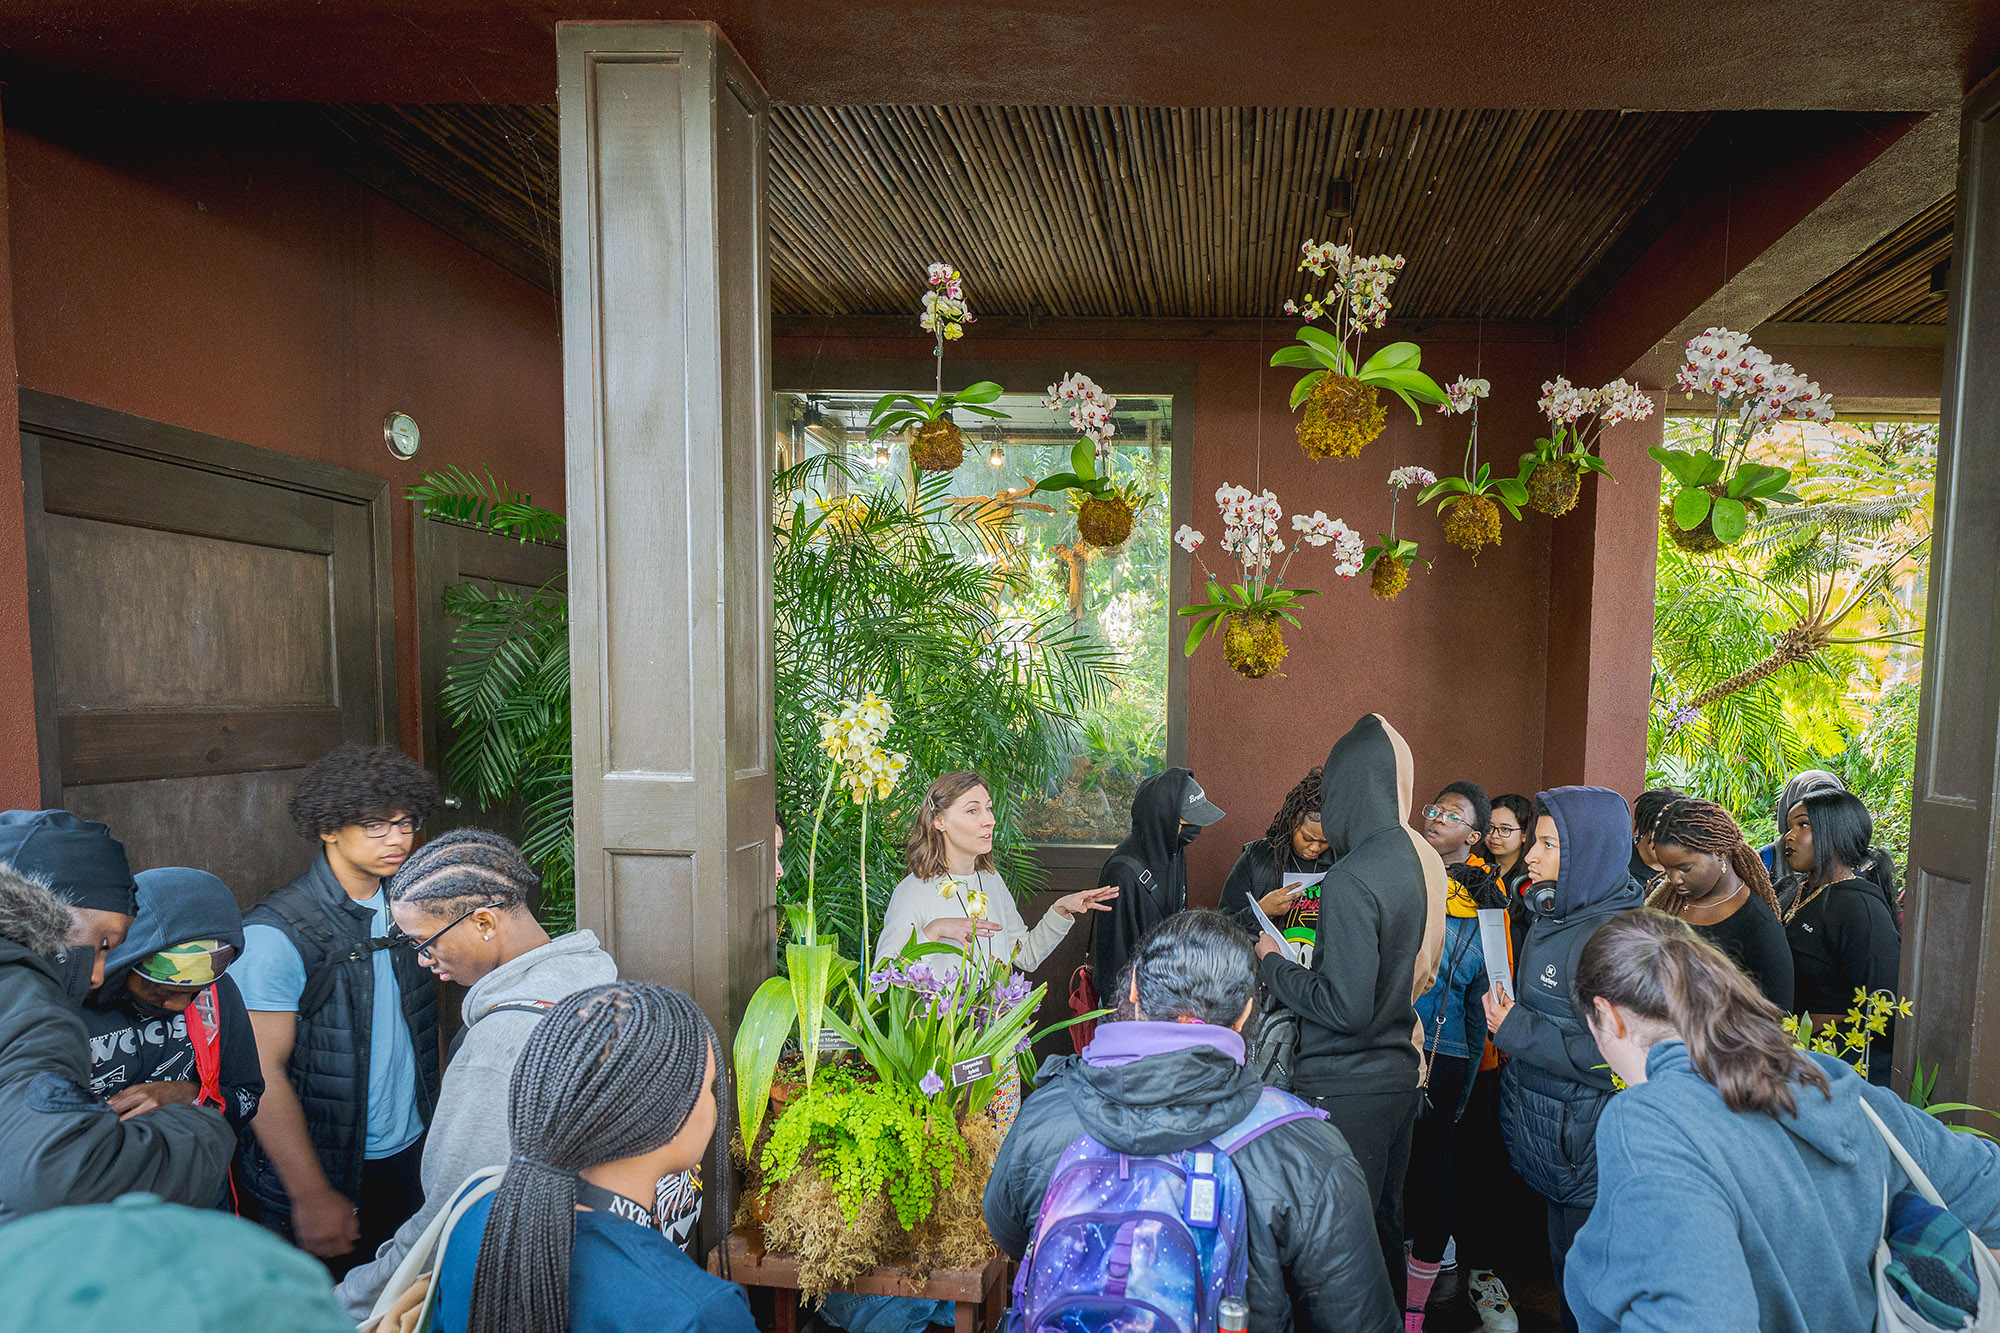 A tour guide speaks with a class of students as they explore a green conservatory